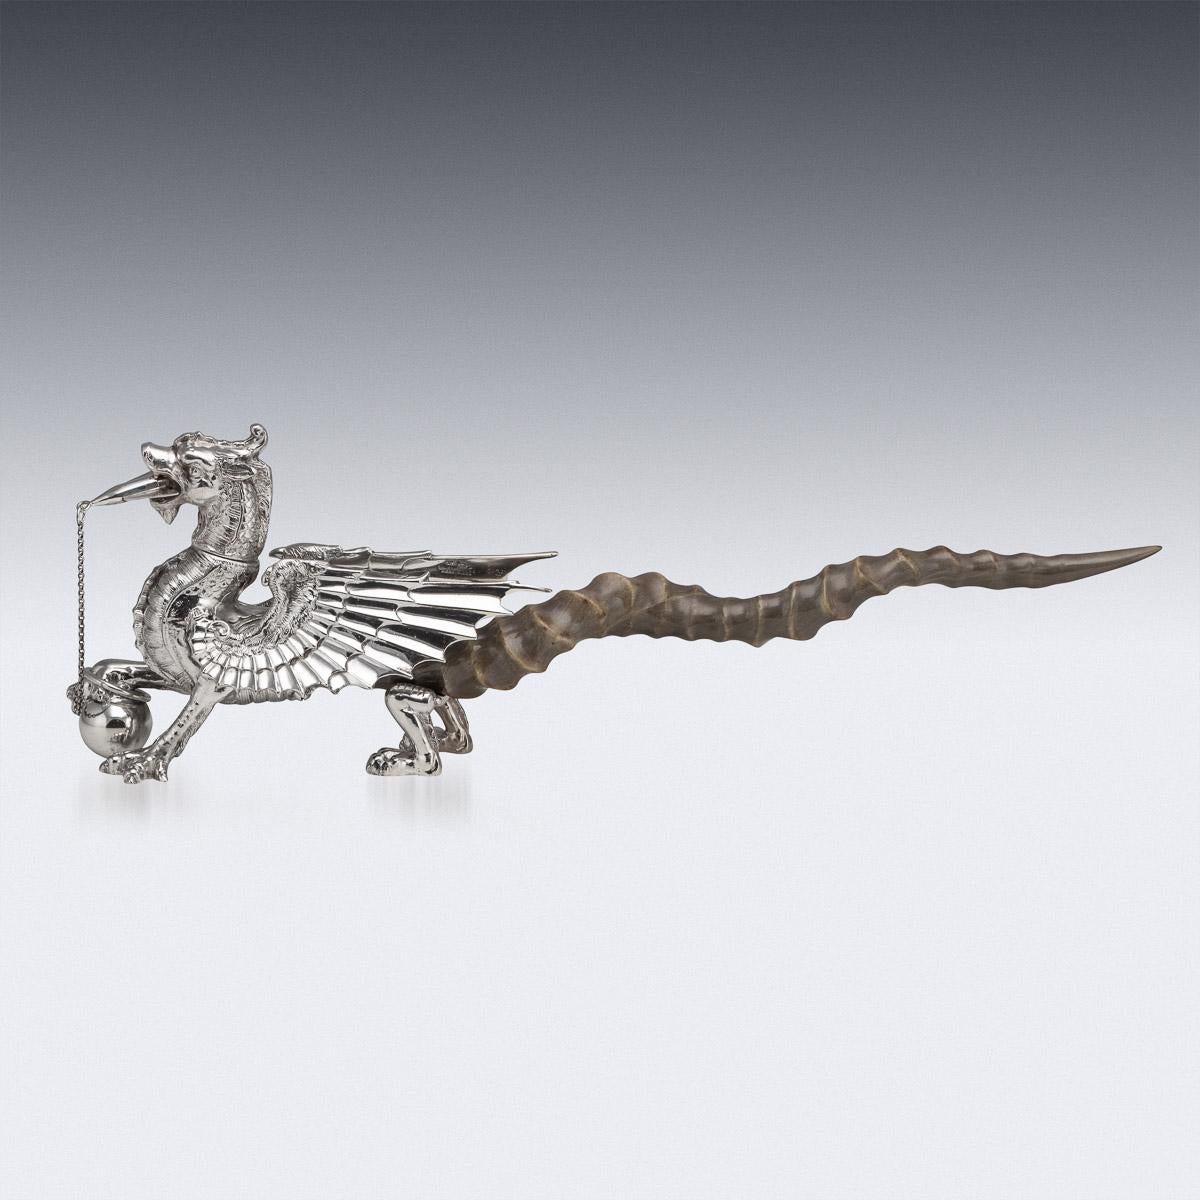 Antique early-20th century Victorian silver plated & horn mounted table cigar lighter. The large Blackbuck antelope horn is mounted with a fire breathing dragon. The exemplary craftsmanship is shown in the cast detail of the silver plated dragon.